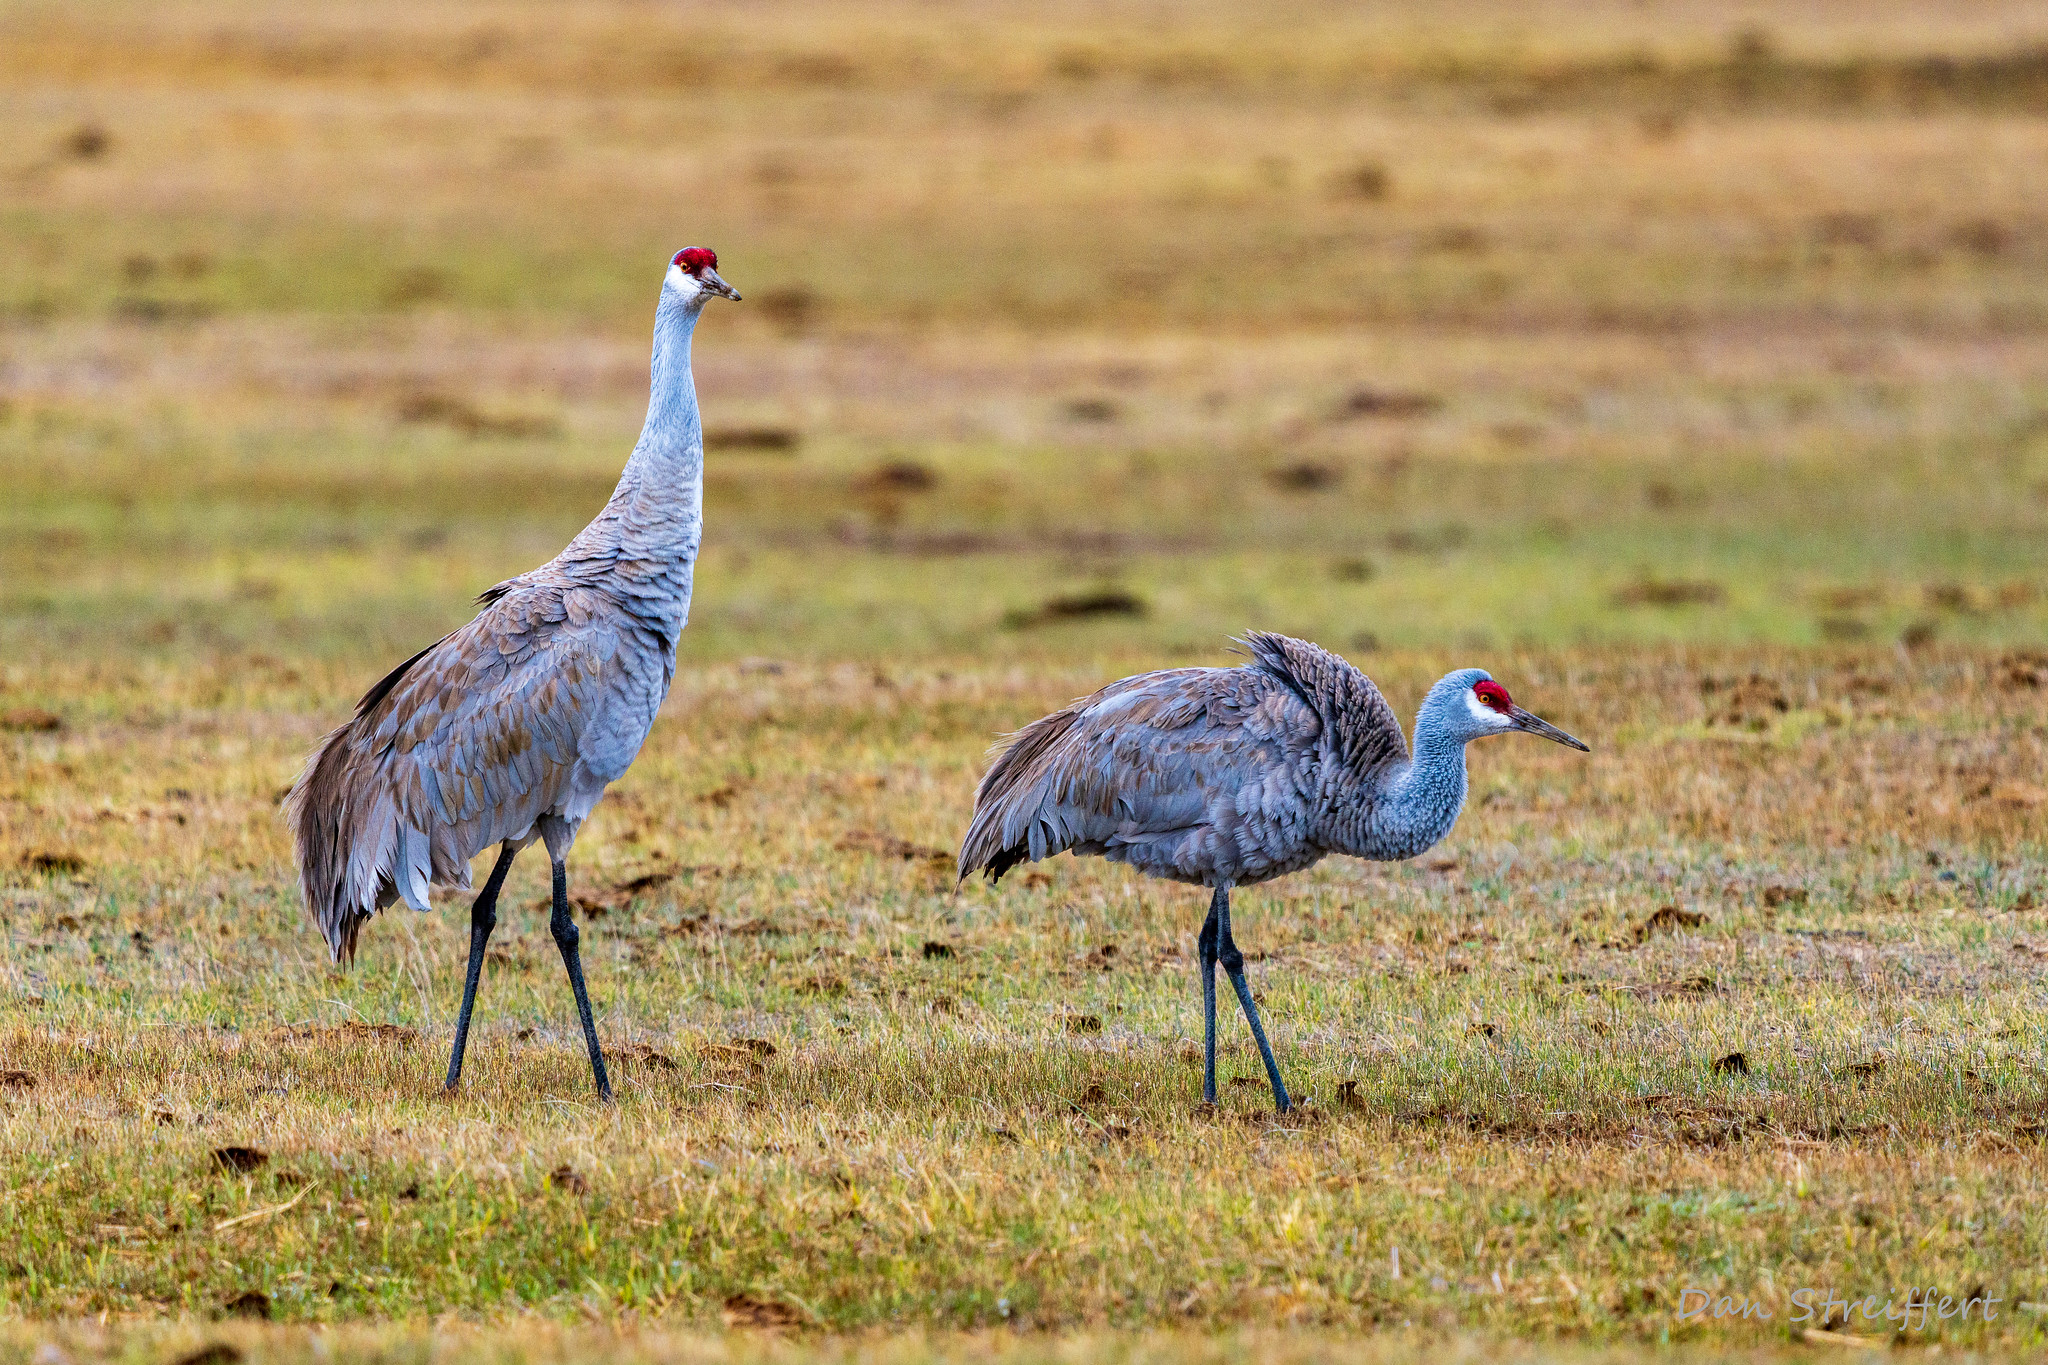 Two Sandhill Crane's in Meadow